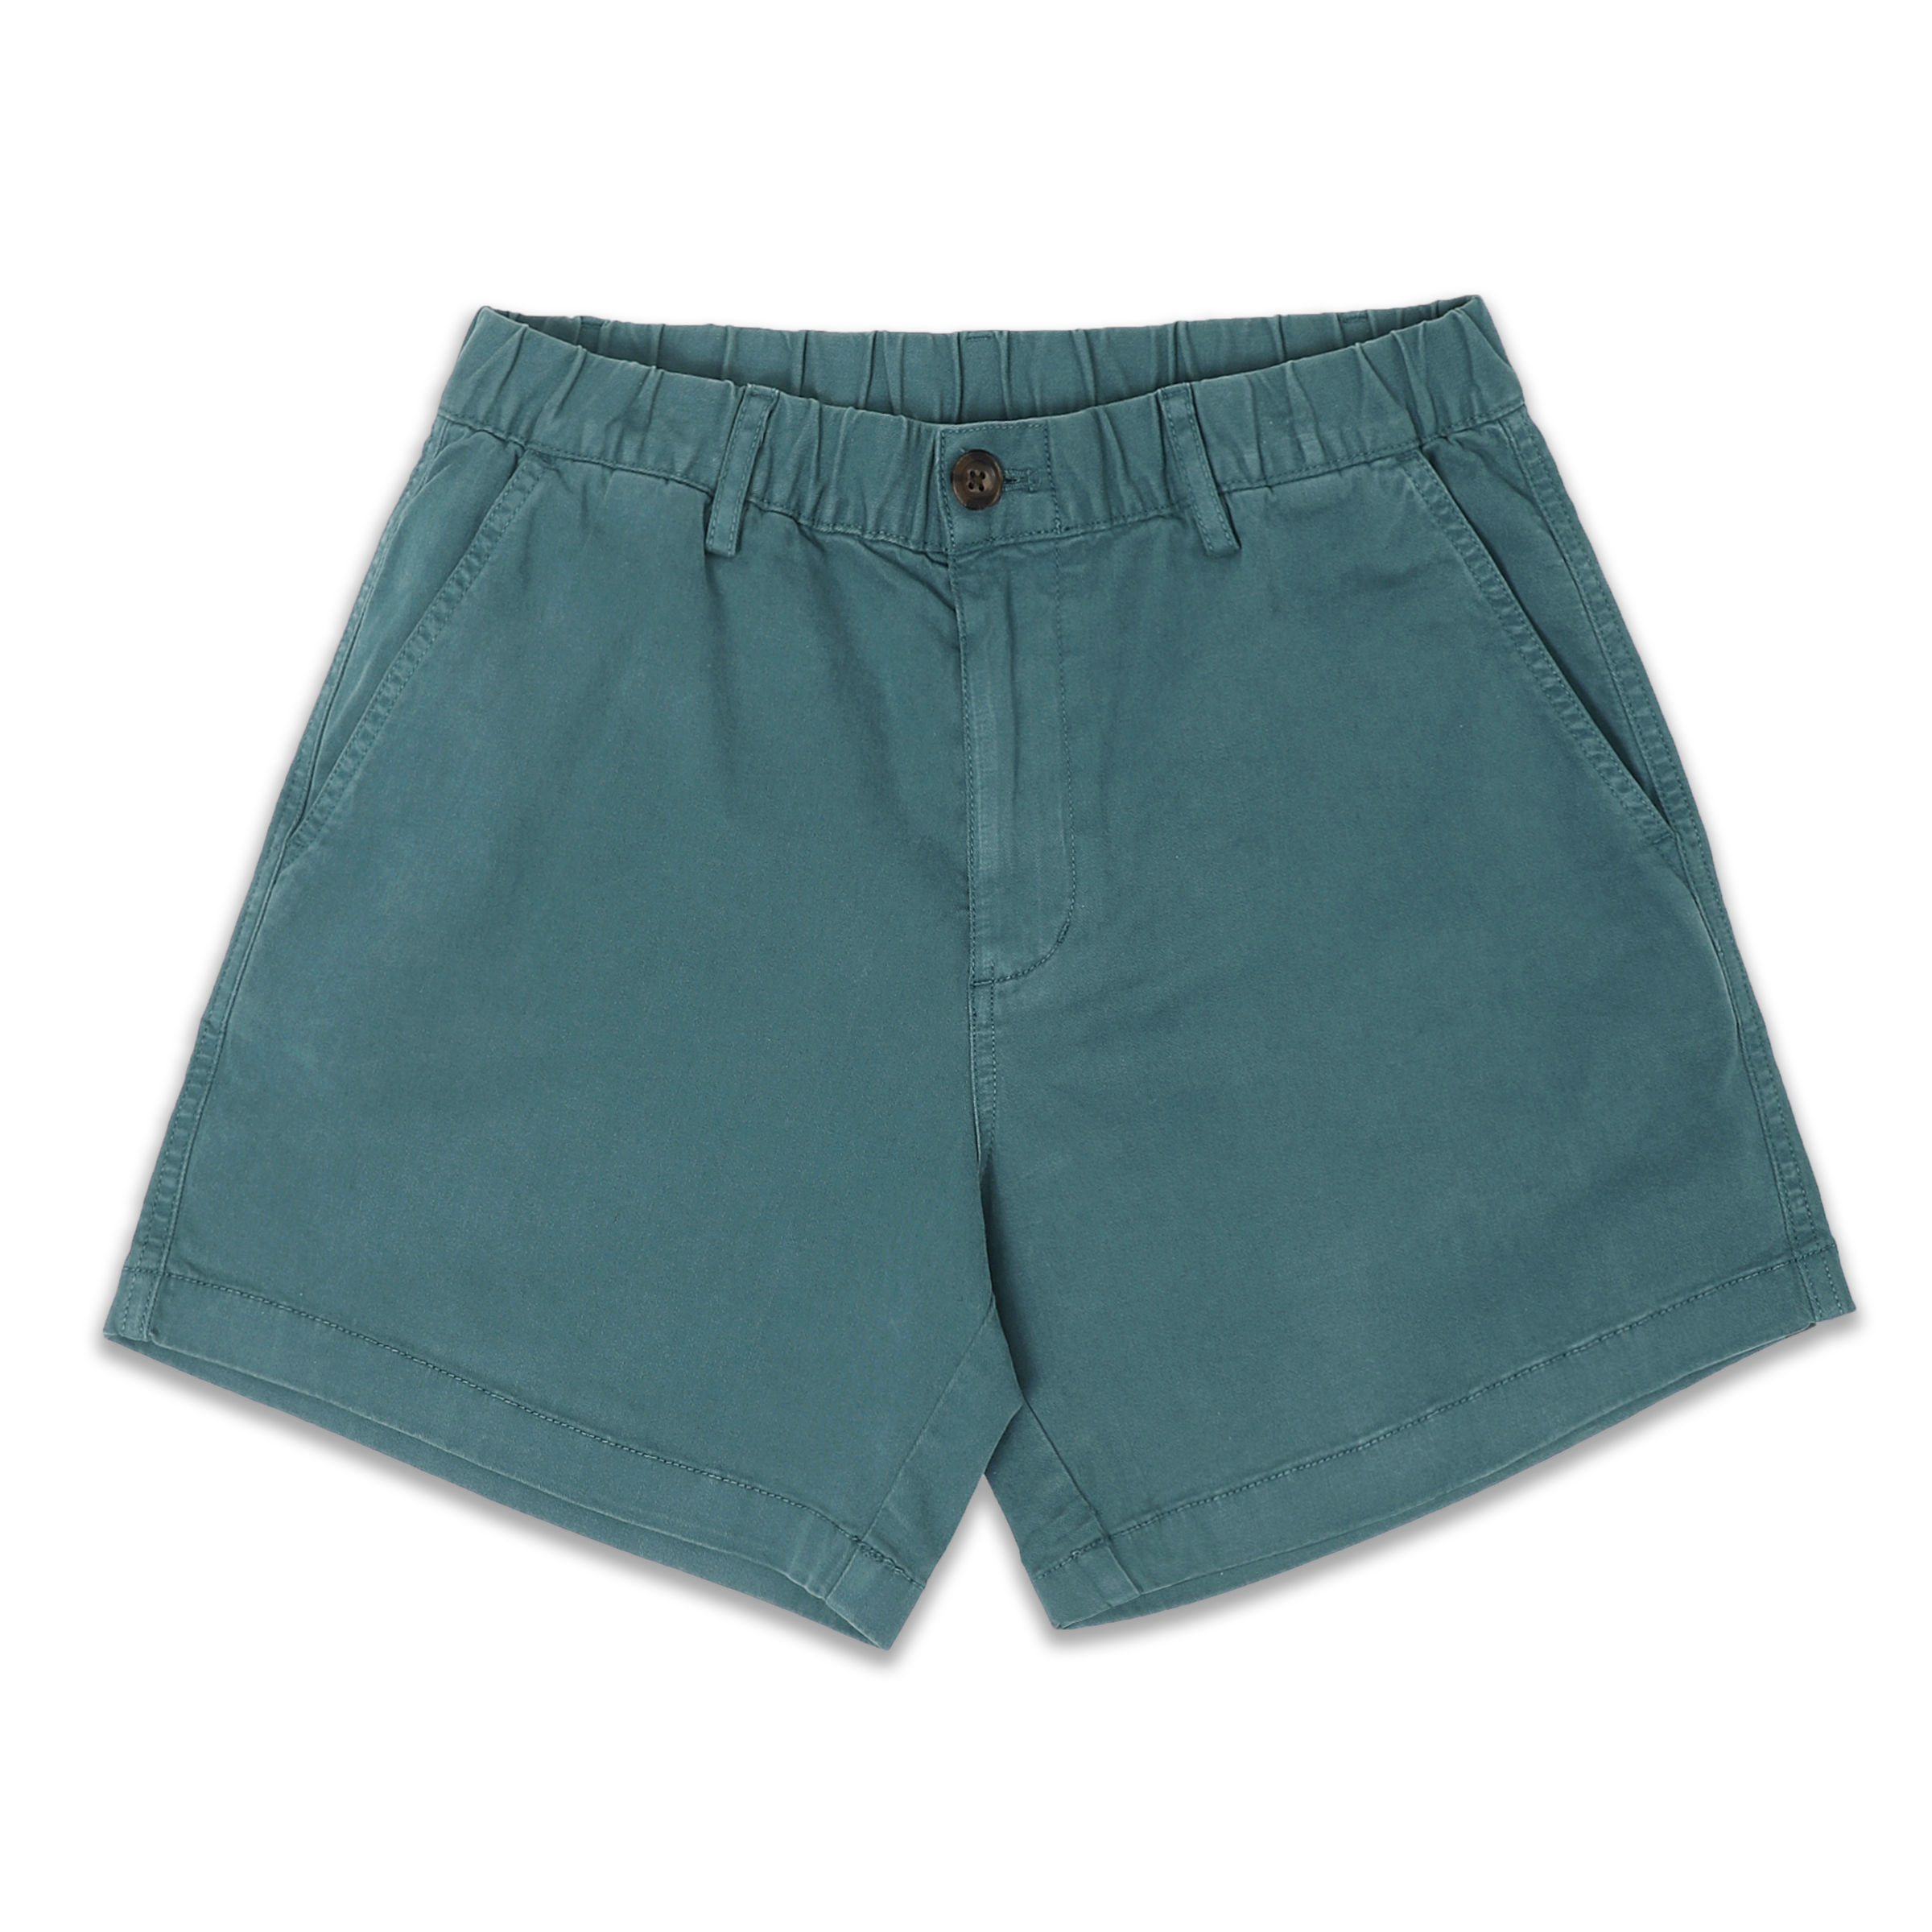 Stretch Short 5.5" Dark Teal front with elastic waistband, belt loops, zipper fly, faux horn button, and two inseam pockets